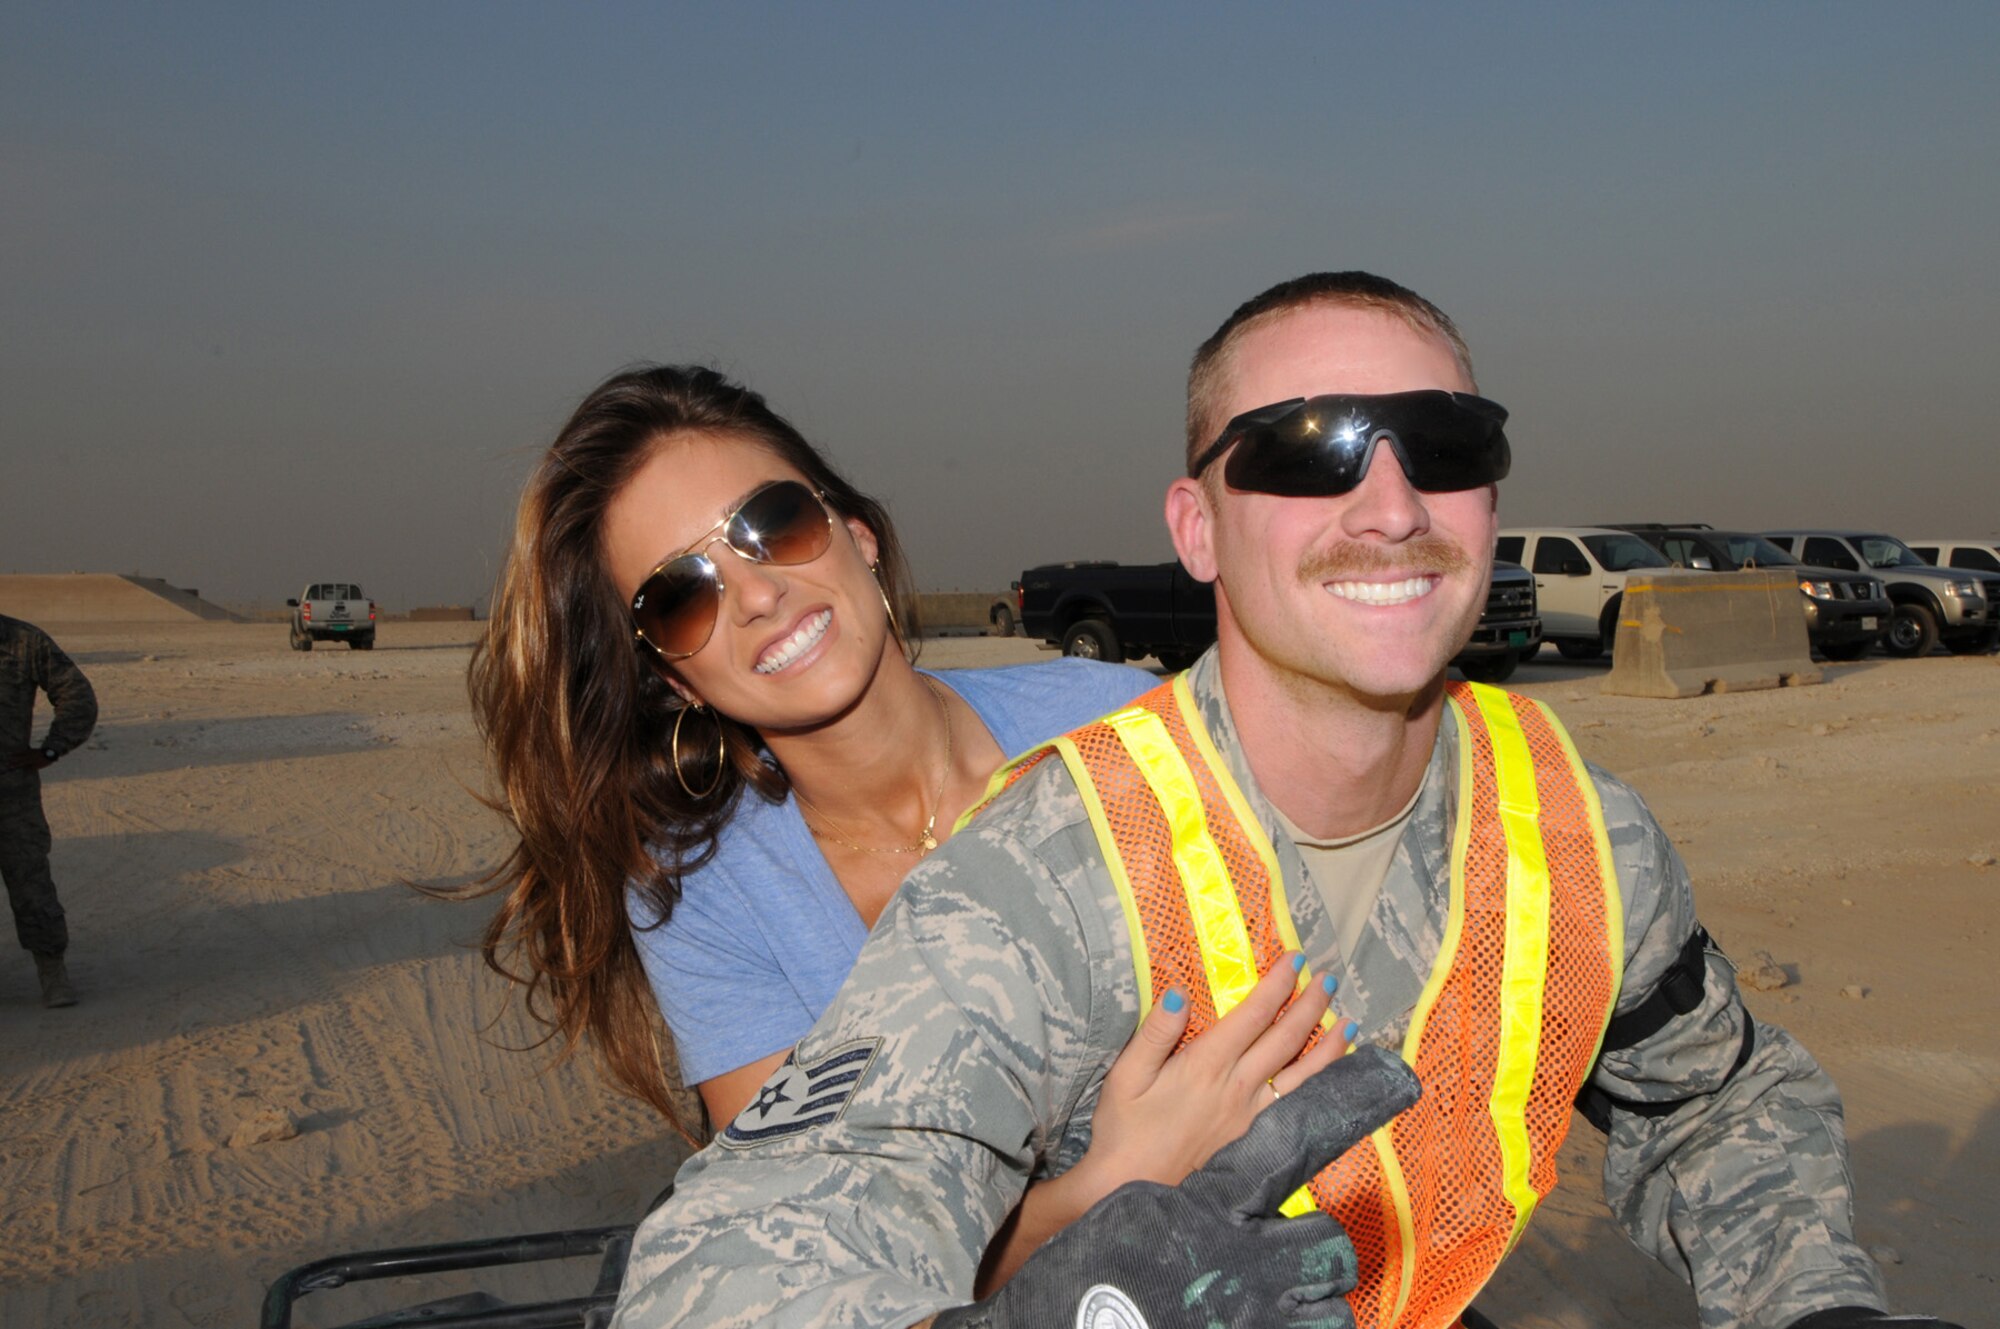 Singer, songwriter Jessie James visits with Staff Sgt. Aaron Burnley, 379th Expeditionary Civil Engineer Squadron, during a tour of the 379th Air Expeditionary Wing, Dec. 5, 2009. Tour for Troops 2009 will visit various deployed locations throughout Southwest Asia and Europe and is sponsored by the U.S. Air Force Reserve Command. (US Air Force Photo/Tech. Sgt. Jason Edwards)